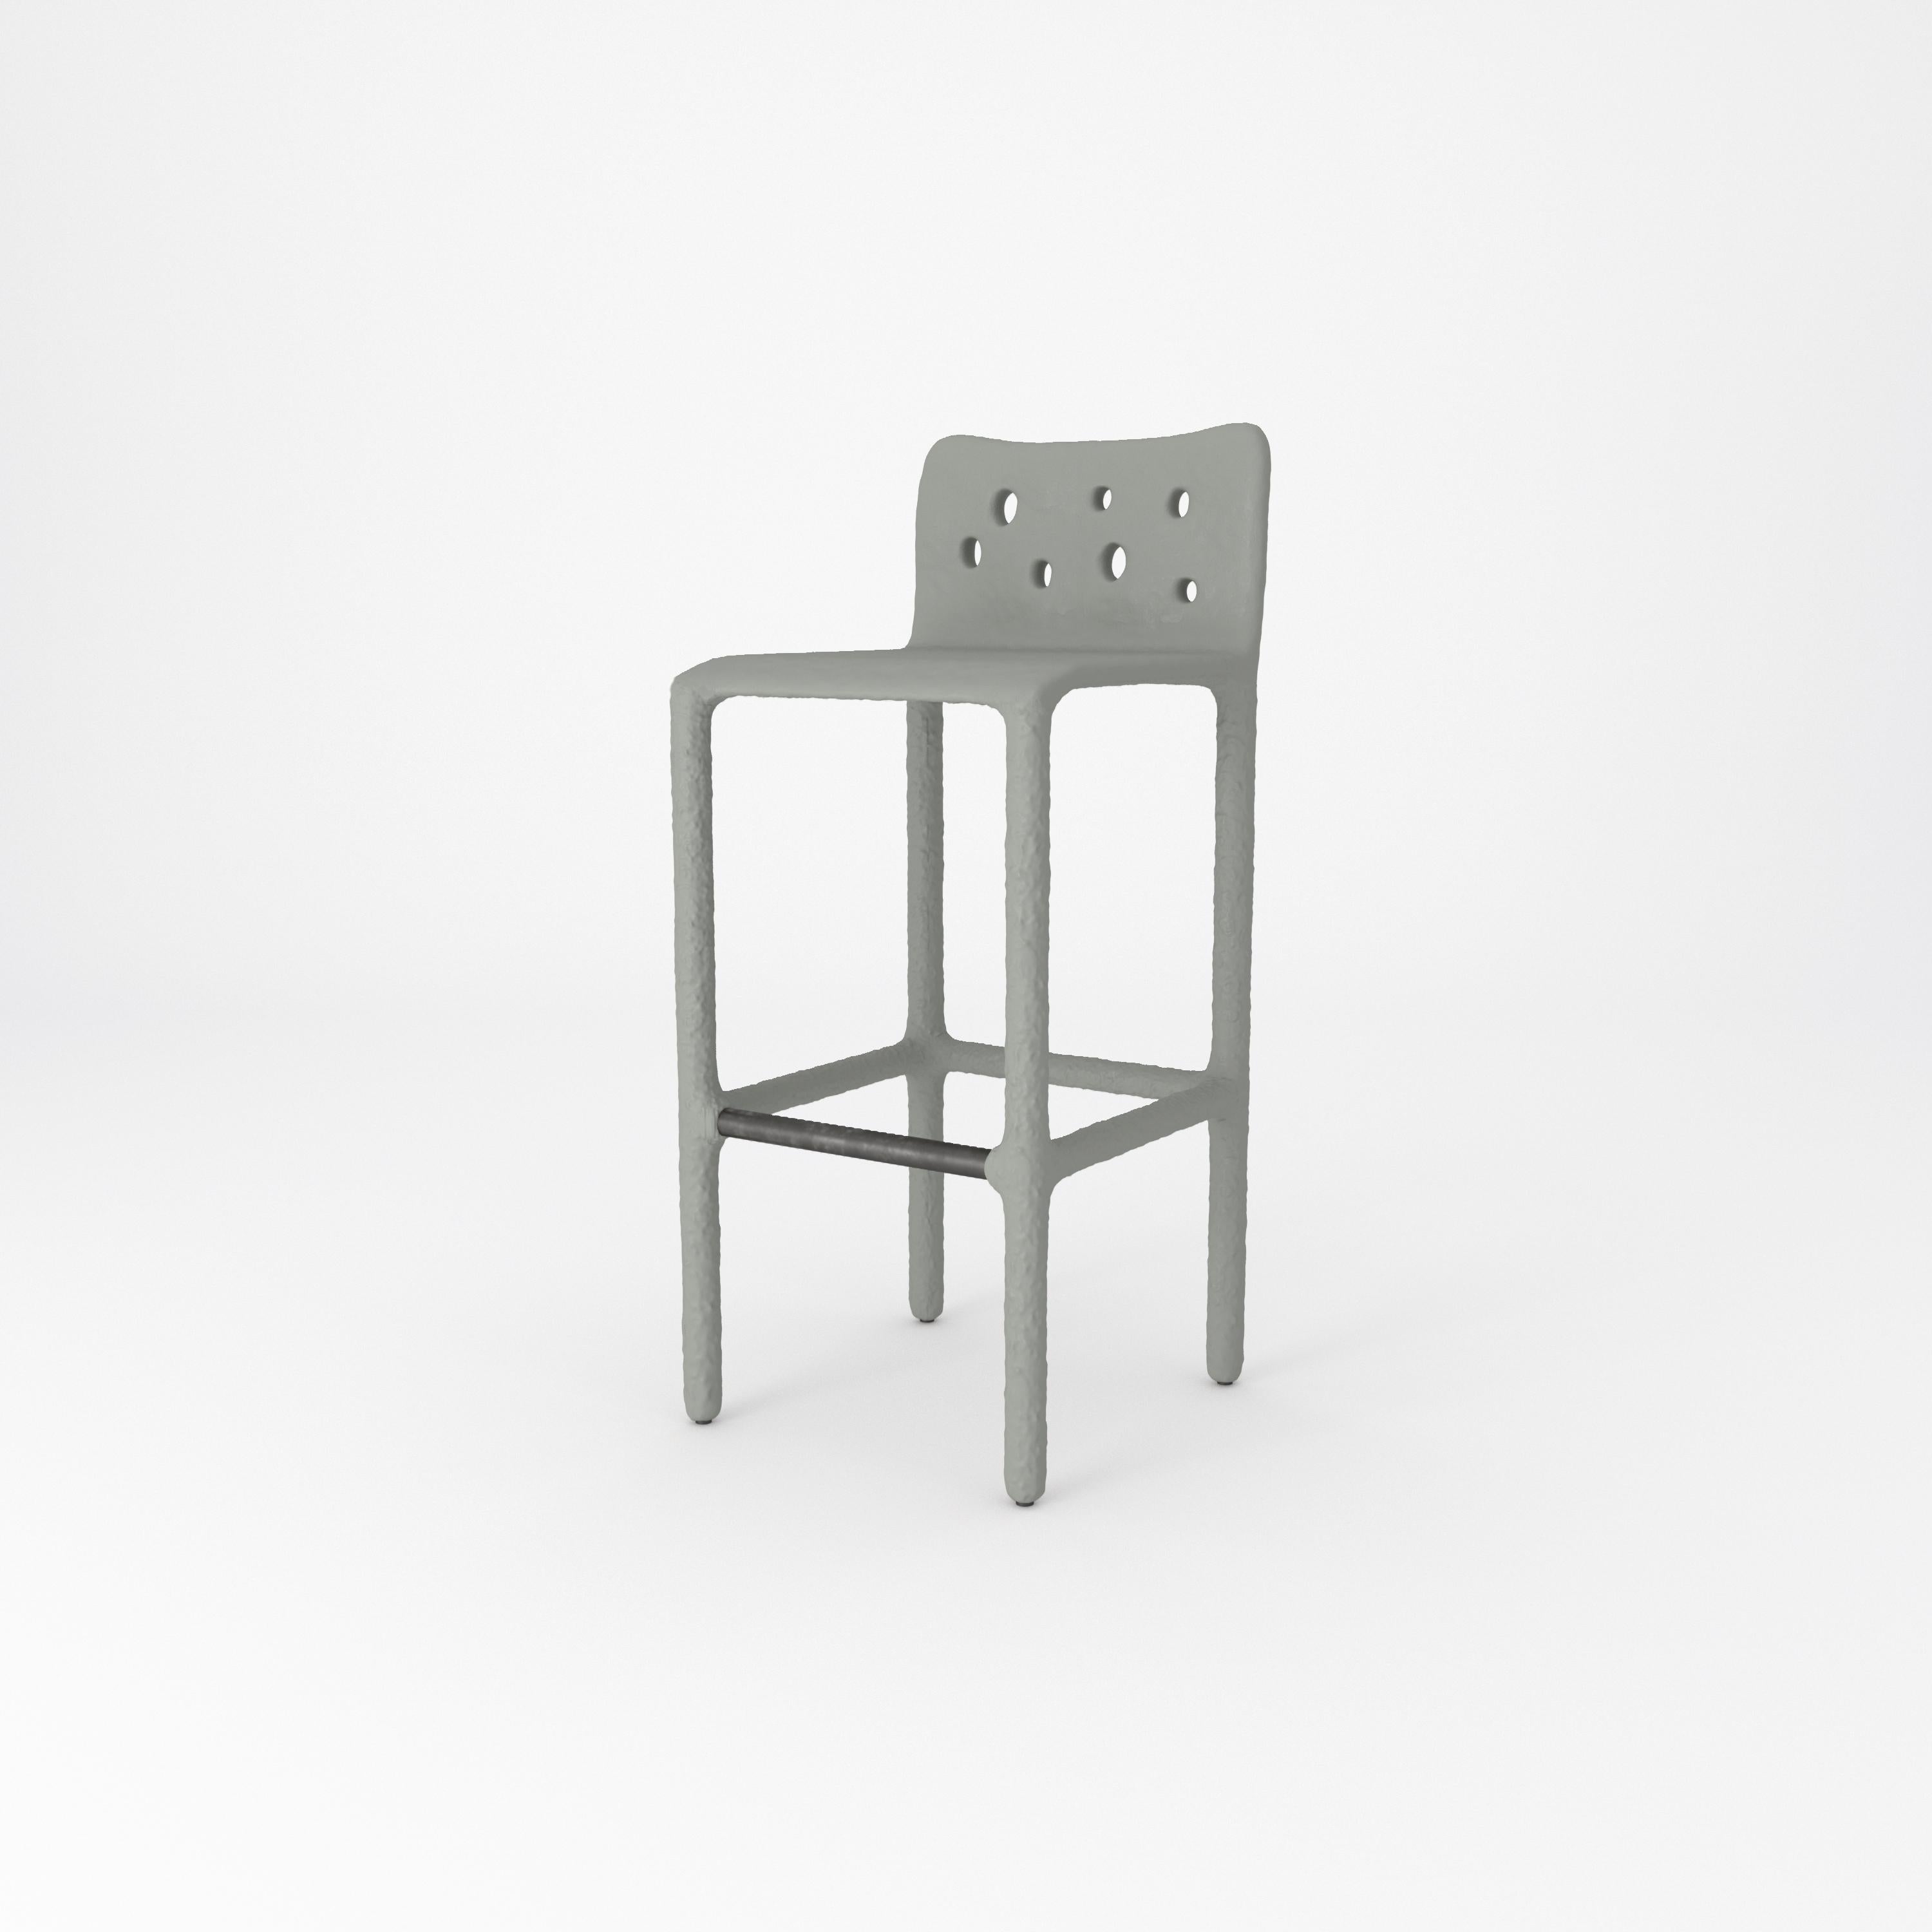 Green Sculpted Contemporary Chair by Faina For Sale 2